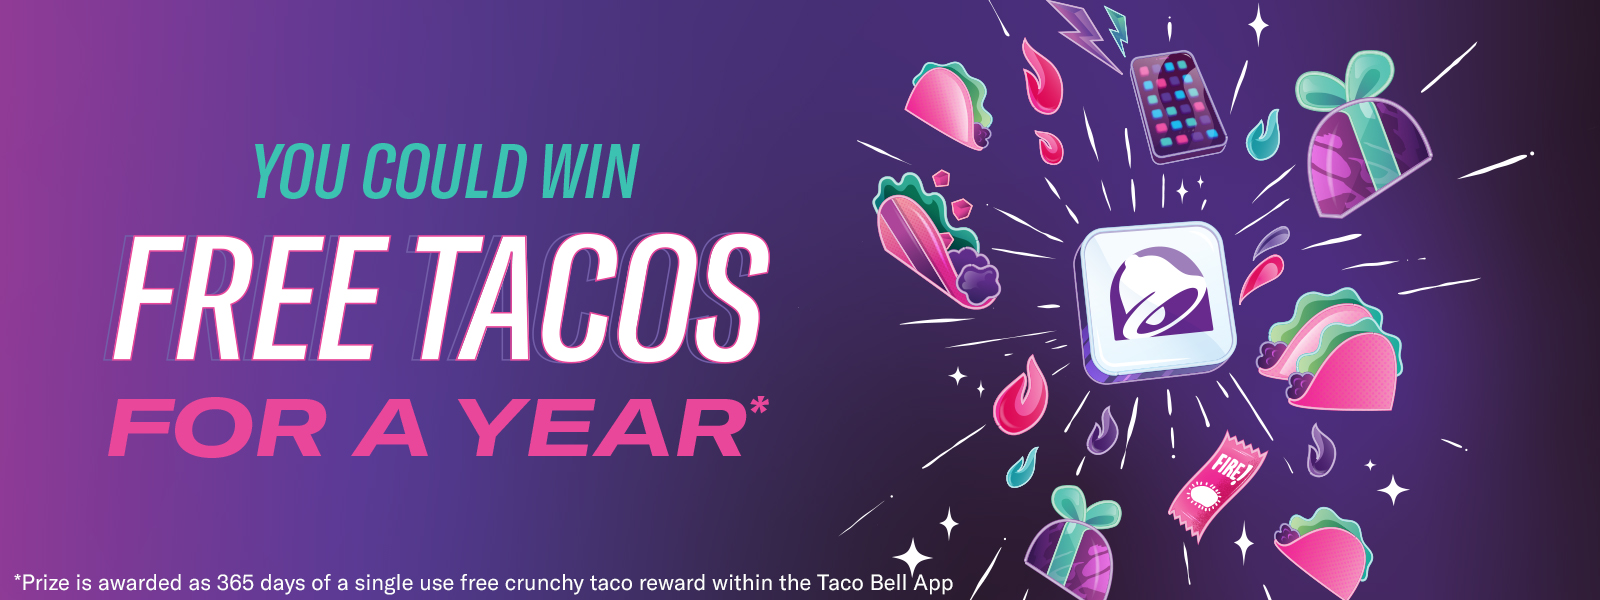 Taco Bell – Free Tacos For A Year Sweepstakes